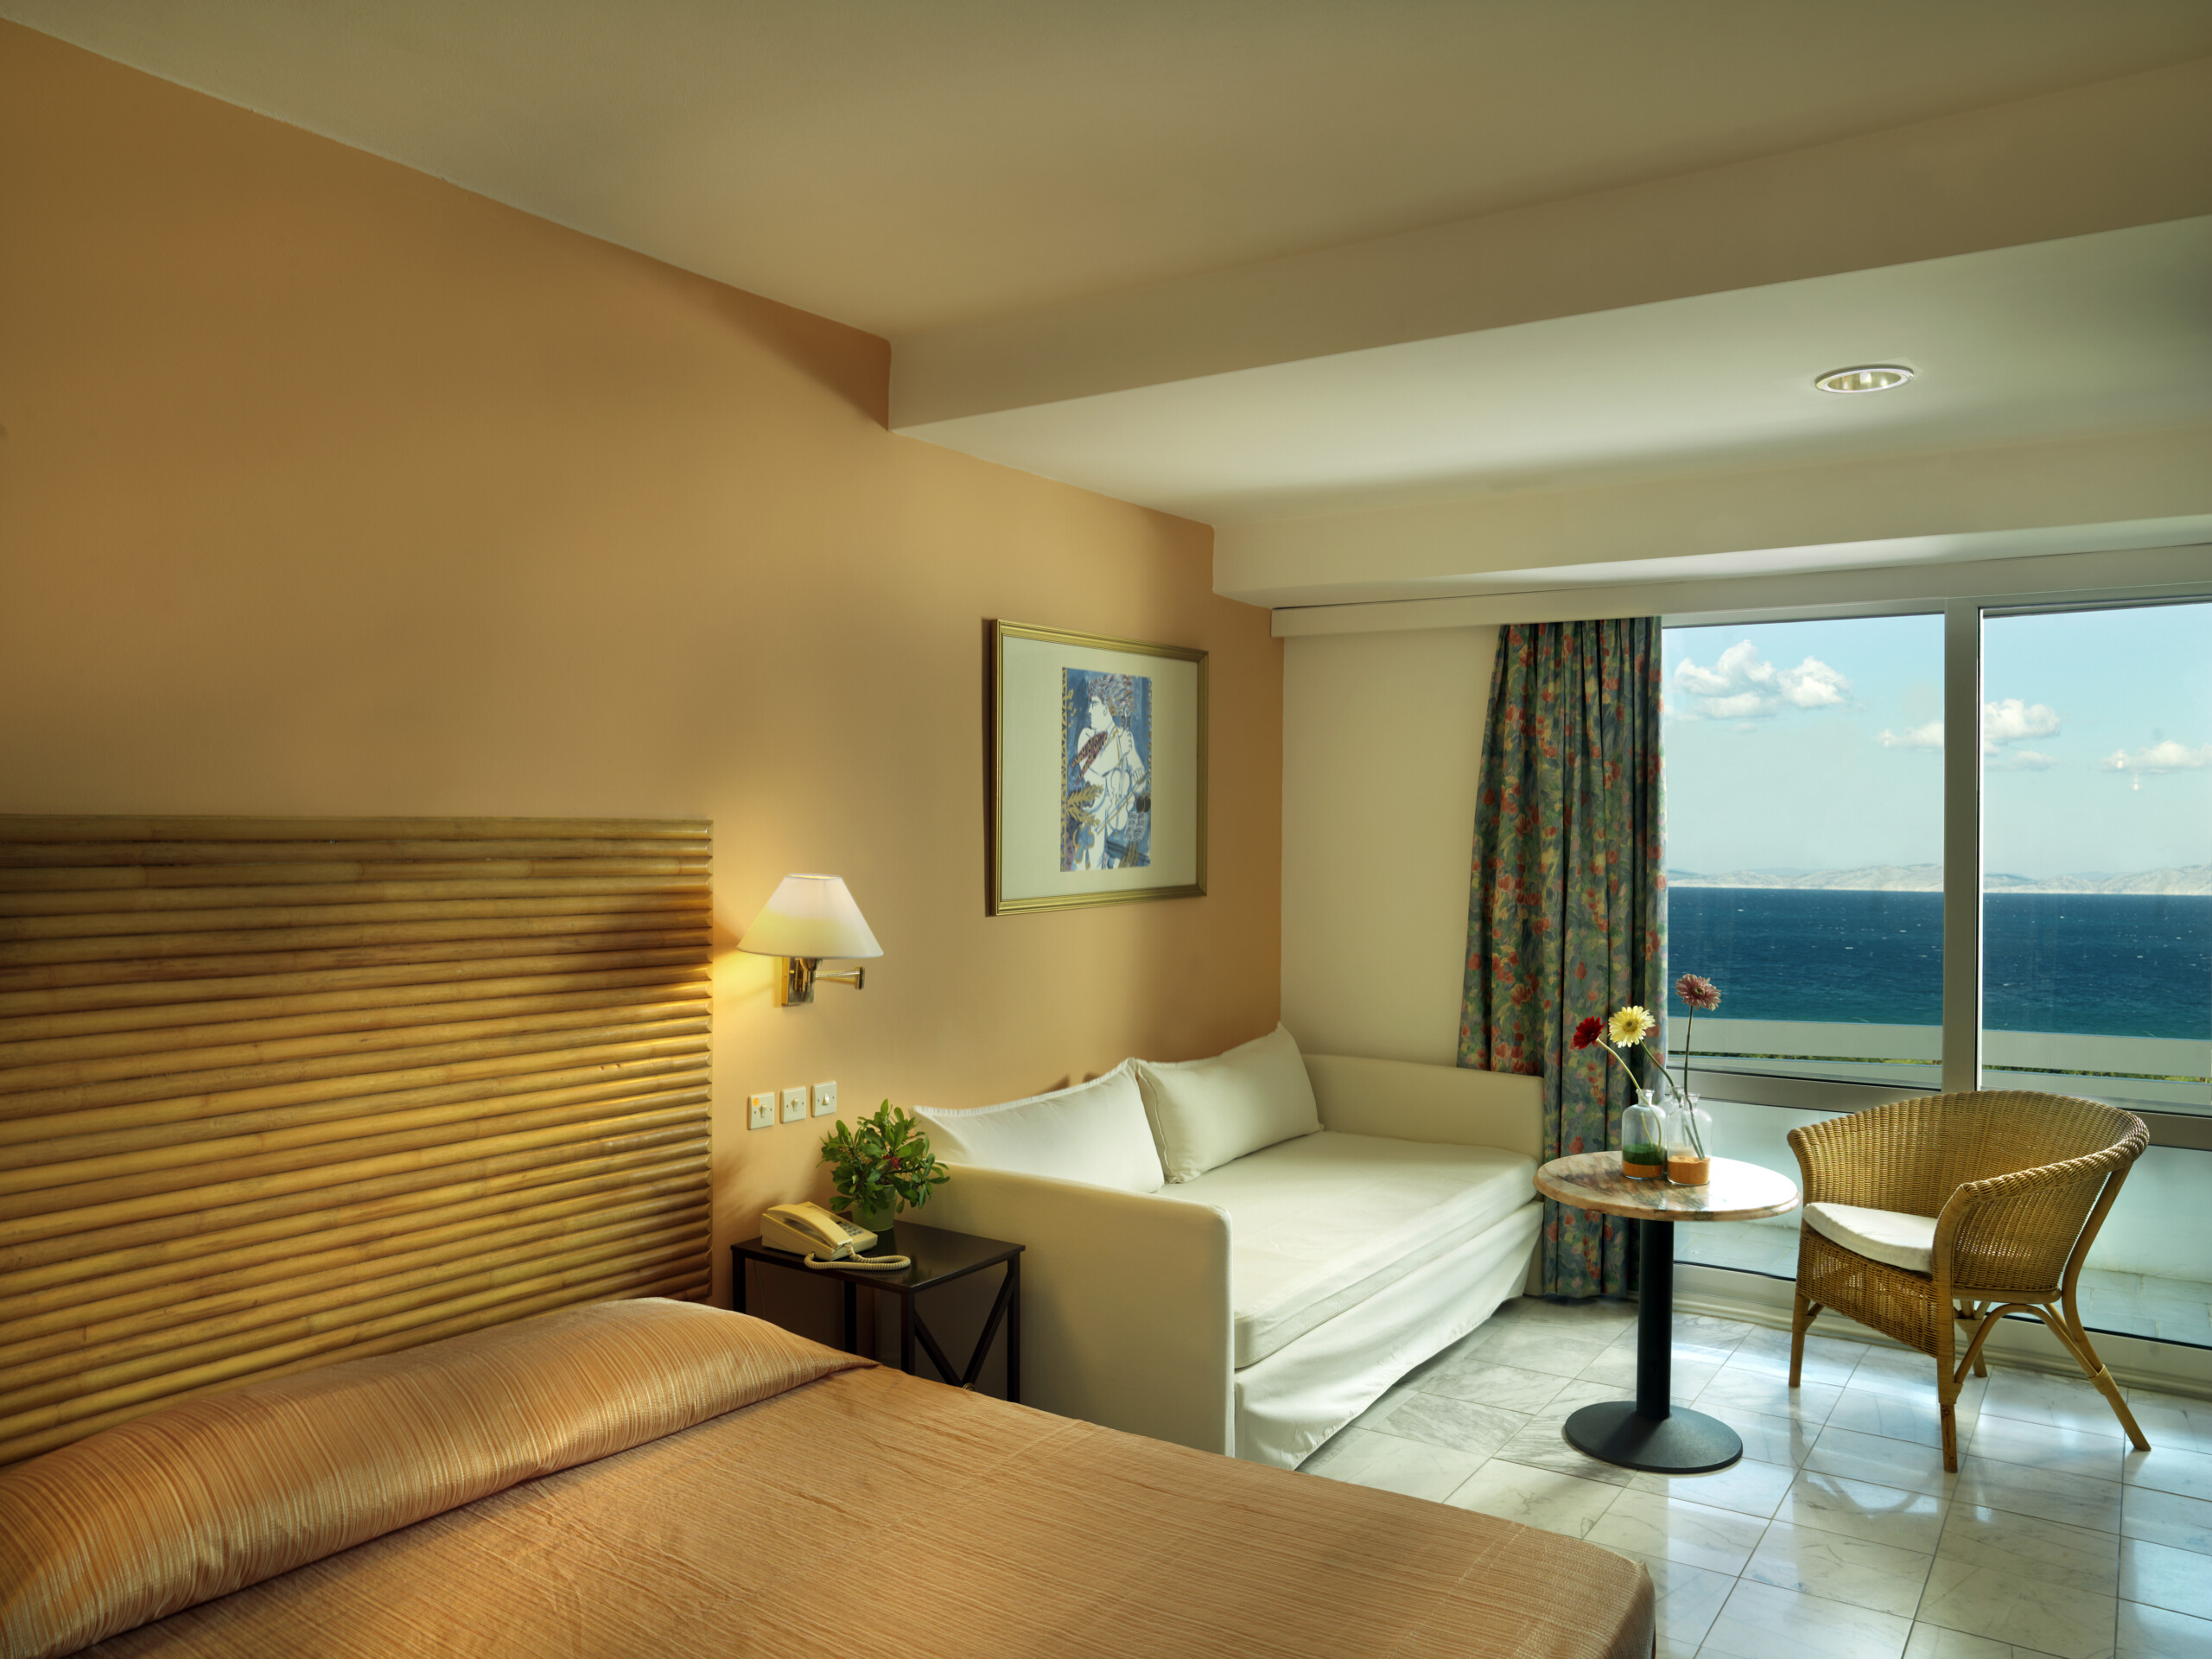 Charming image of a room at Dionysos Hotel, featuring the bed, seating area, and sea view balcony.